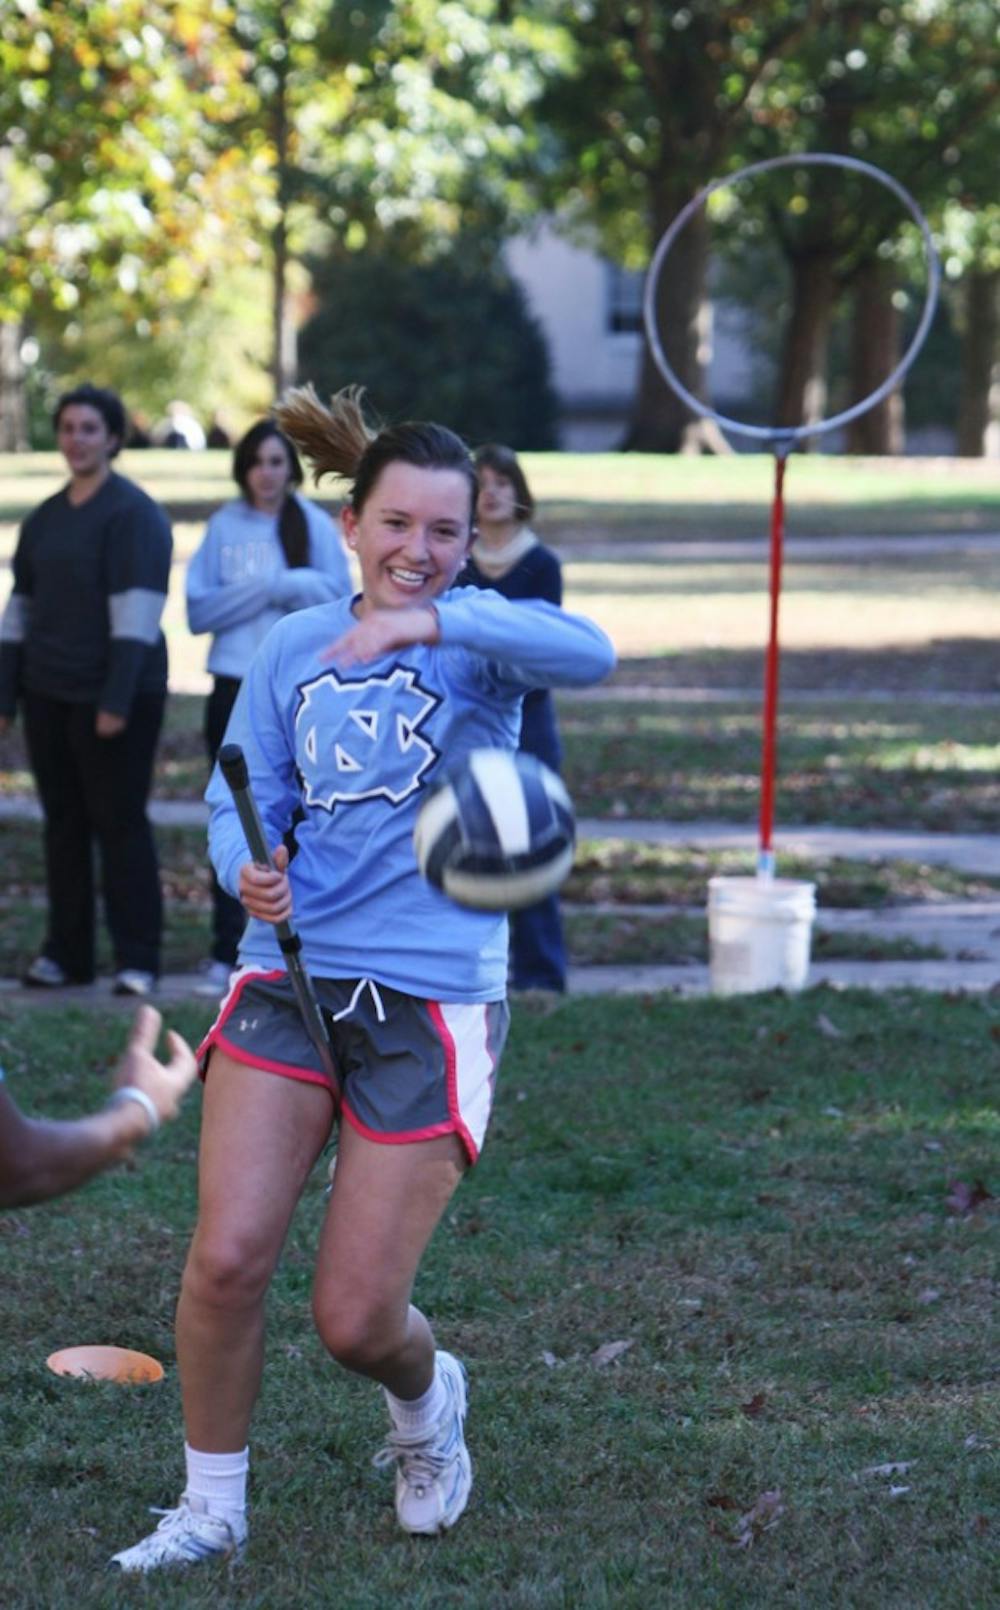 Archaeology and economics double major Sam Kiefer plays Quidditch with the UNC Quidditch team on Polk Place earlier this month.  